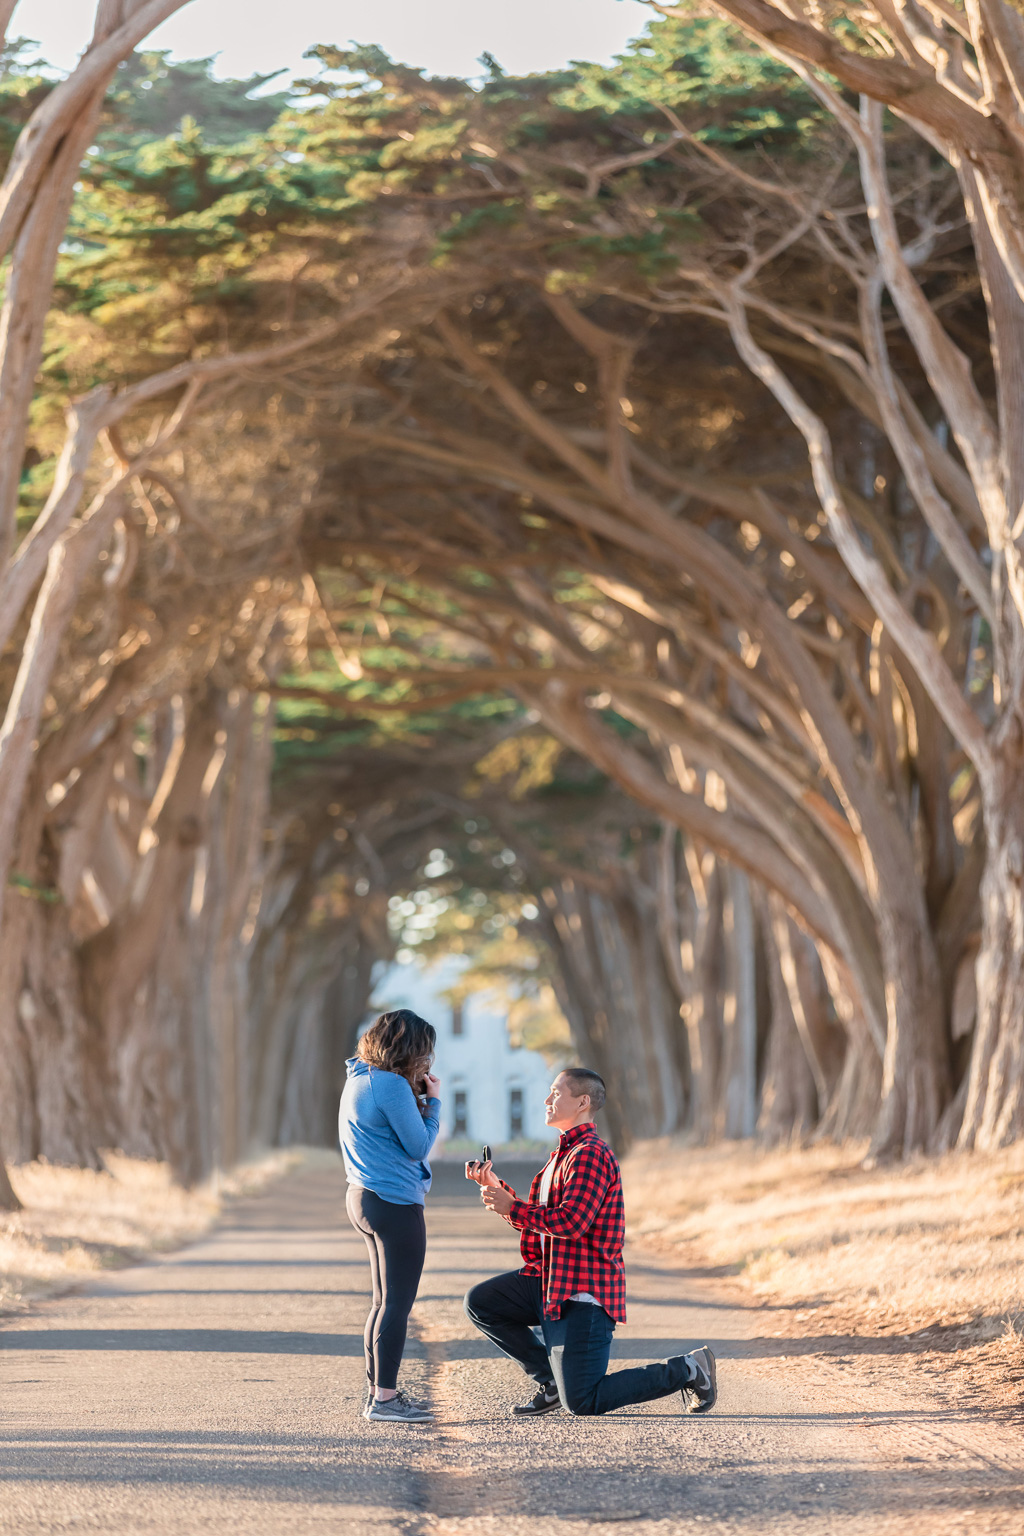 Point Reyes Cypress Tree Tunnel surprise proposal at sunset